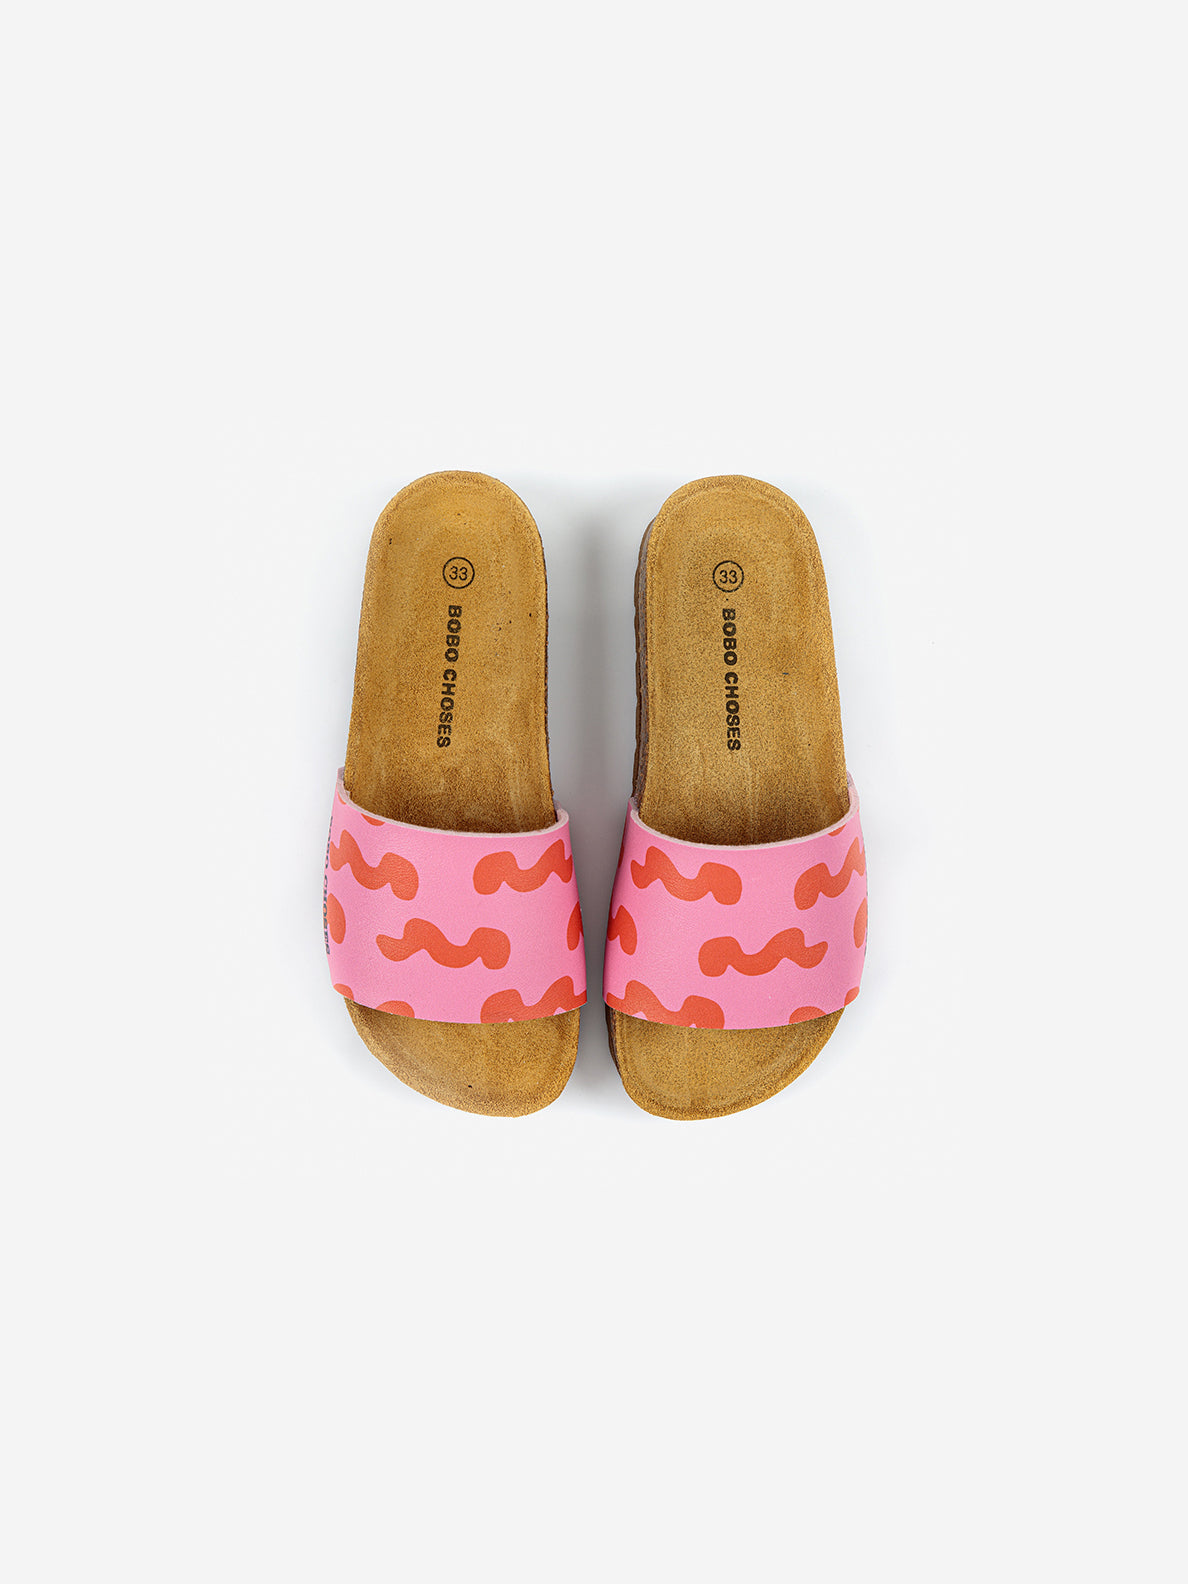 Bobo Choses Waves All Over Sandals